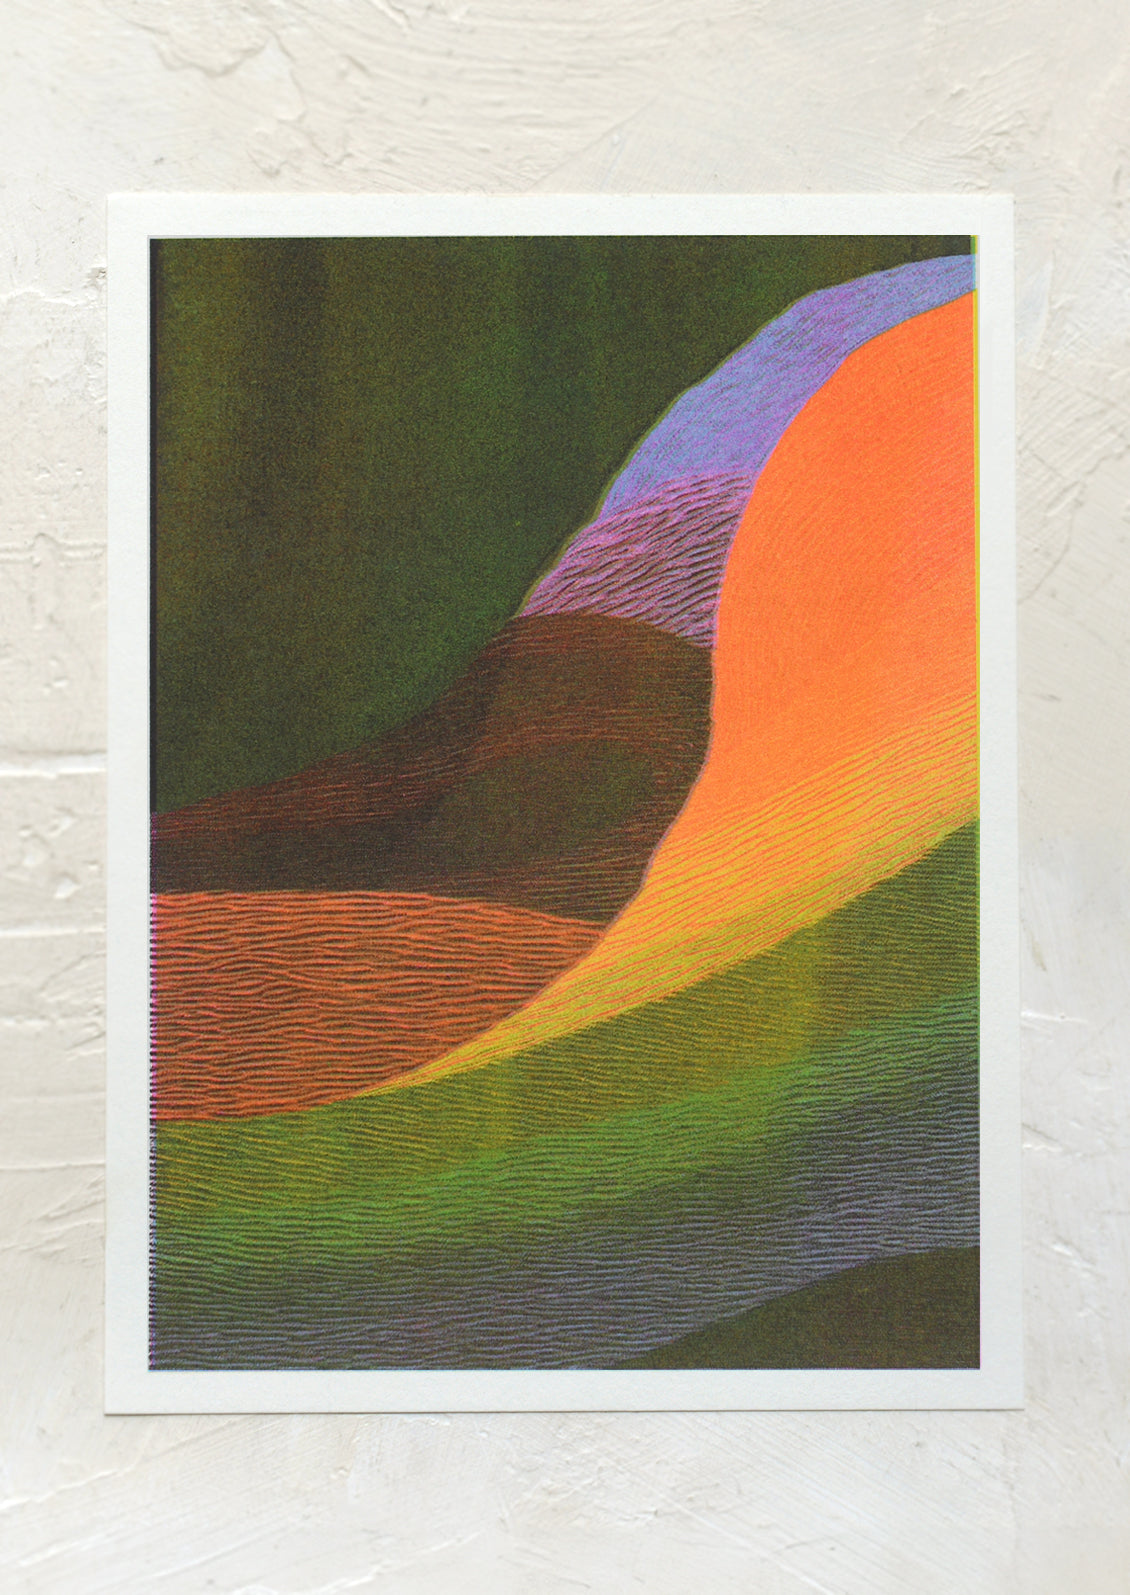 A colorful risograph art print of abstract soundwaves pattern.